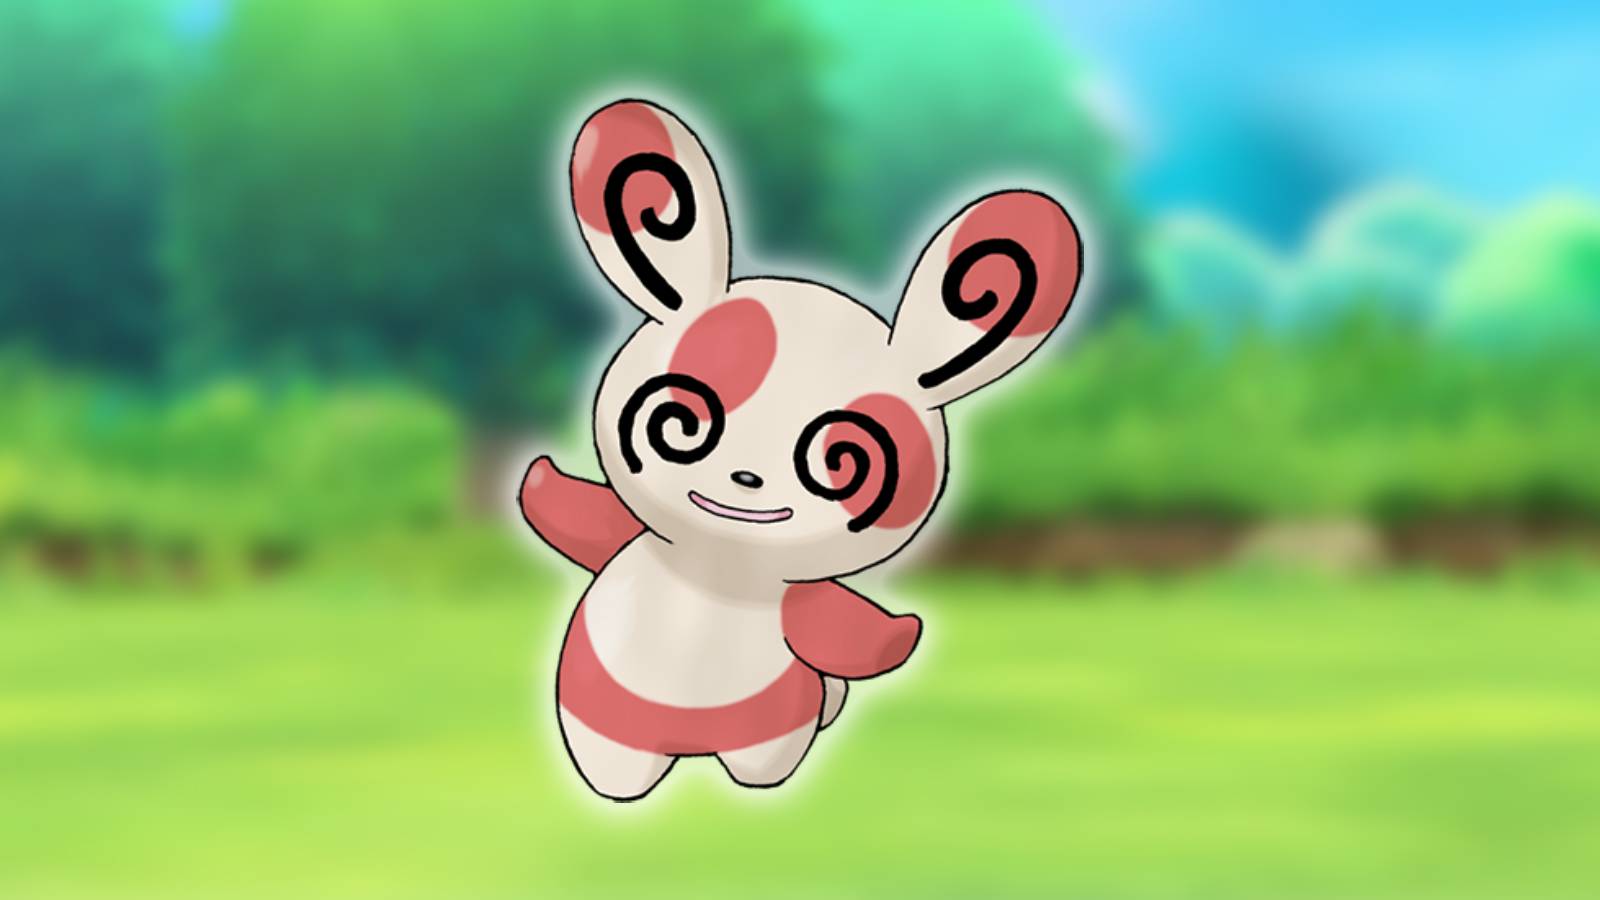 The Pokemon Spinda is shown